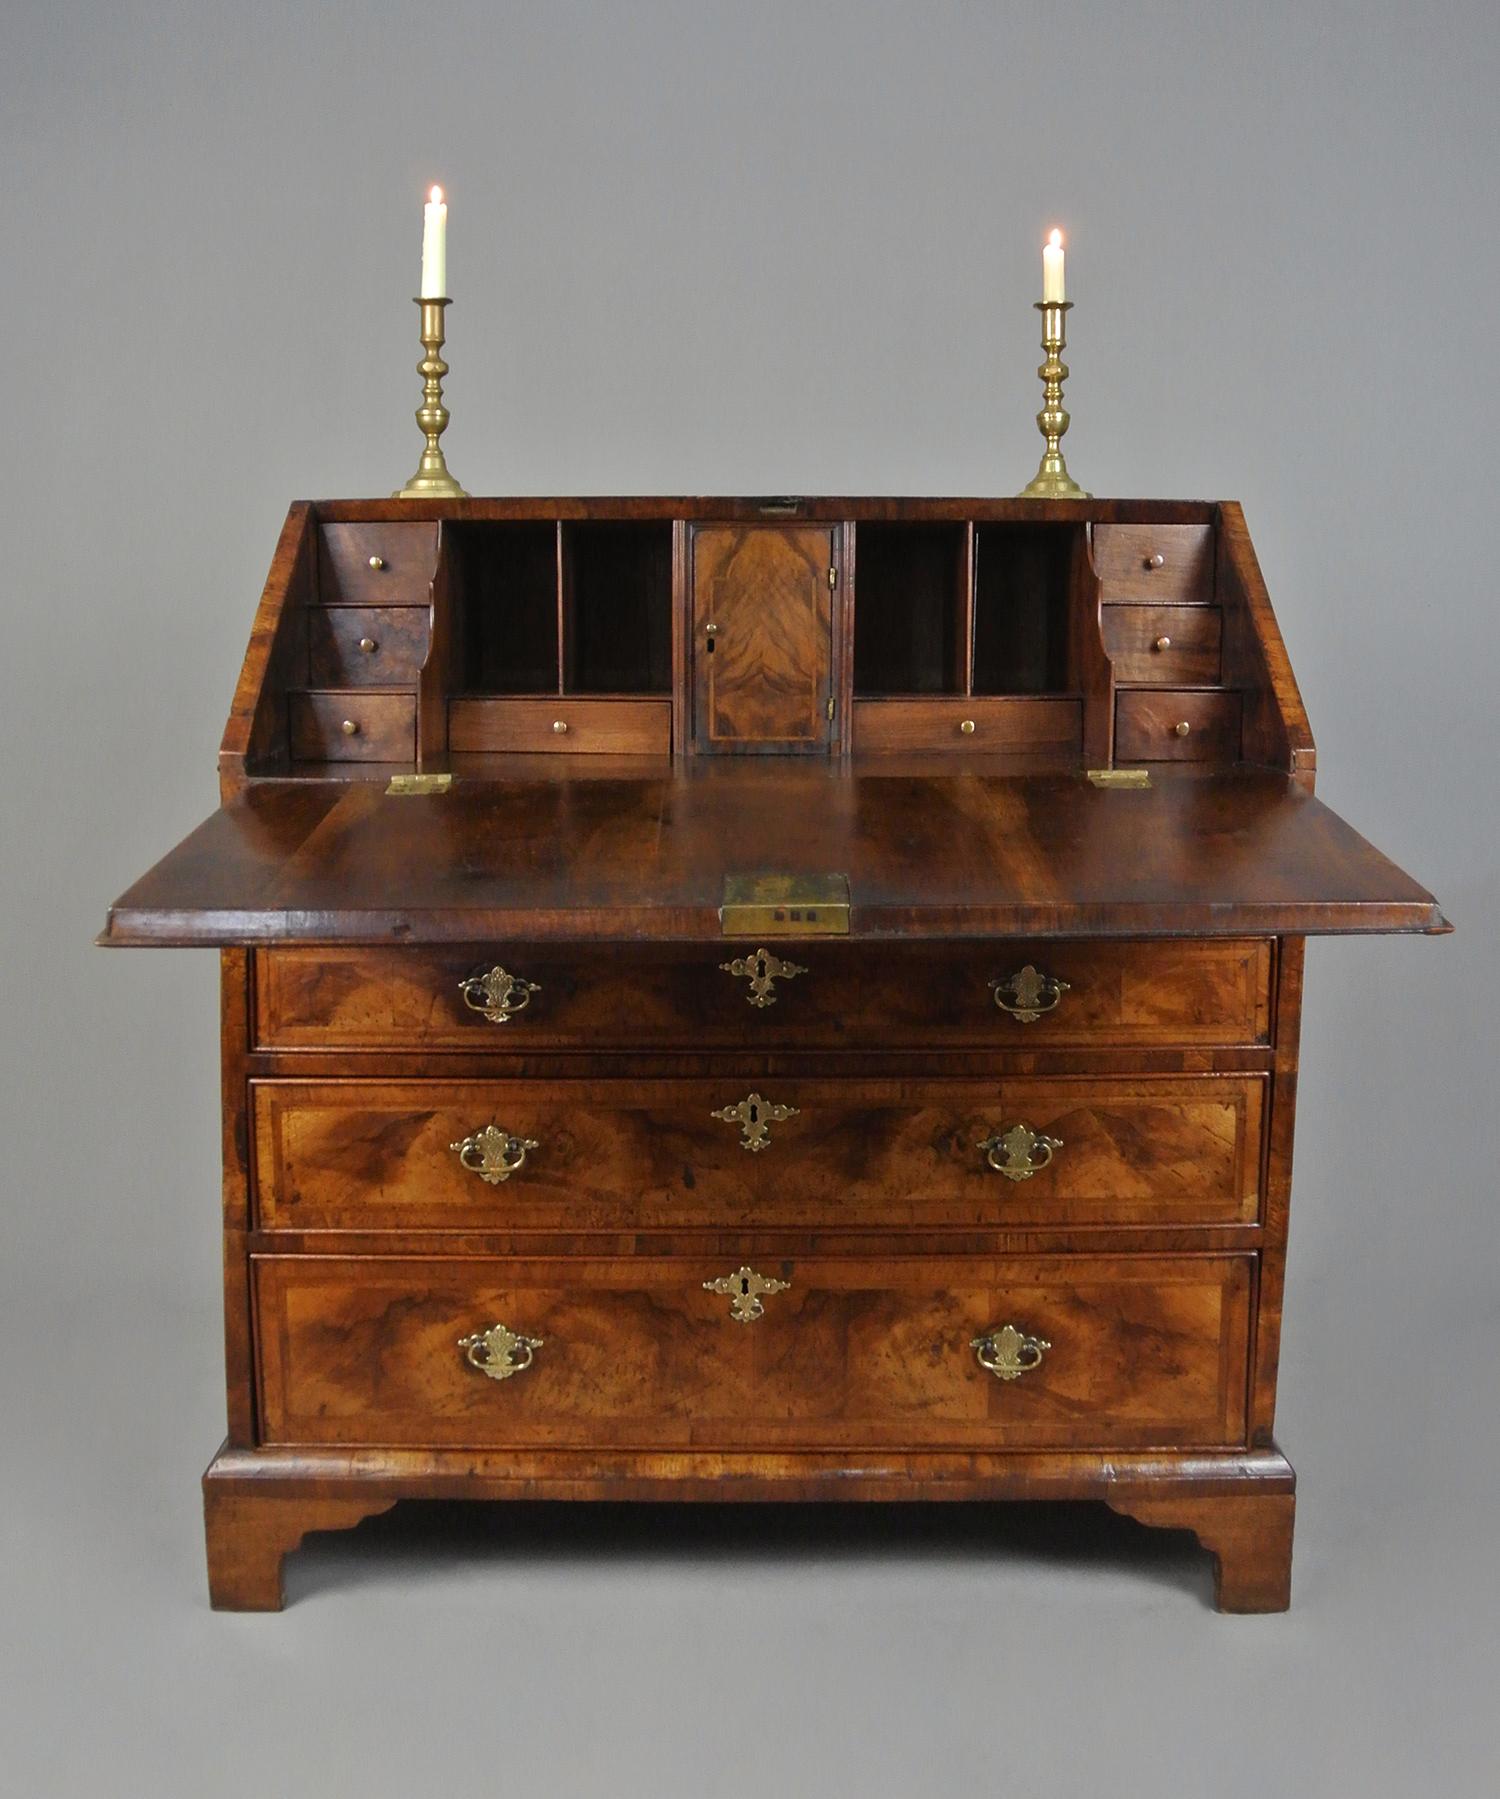 Exceptional George II Yew Wood and Walnut Bureau c. 1750 In Good Condition For Sale In Heathfield, GB